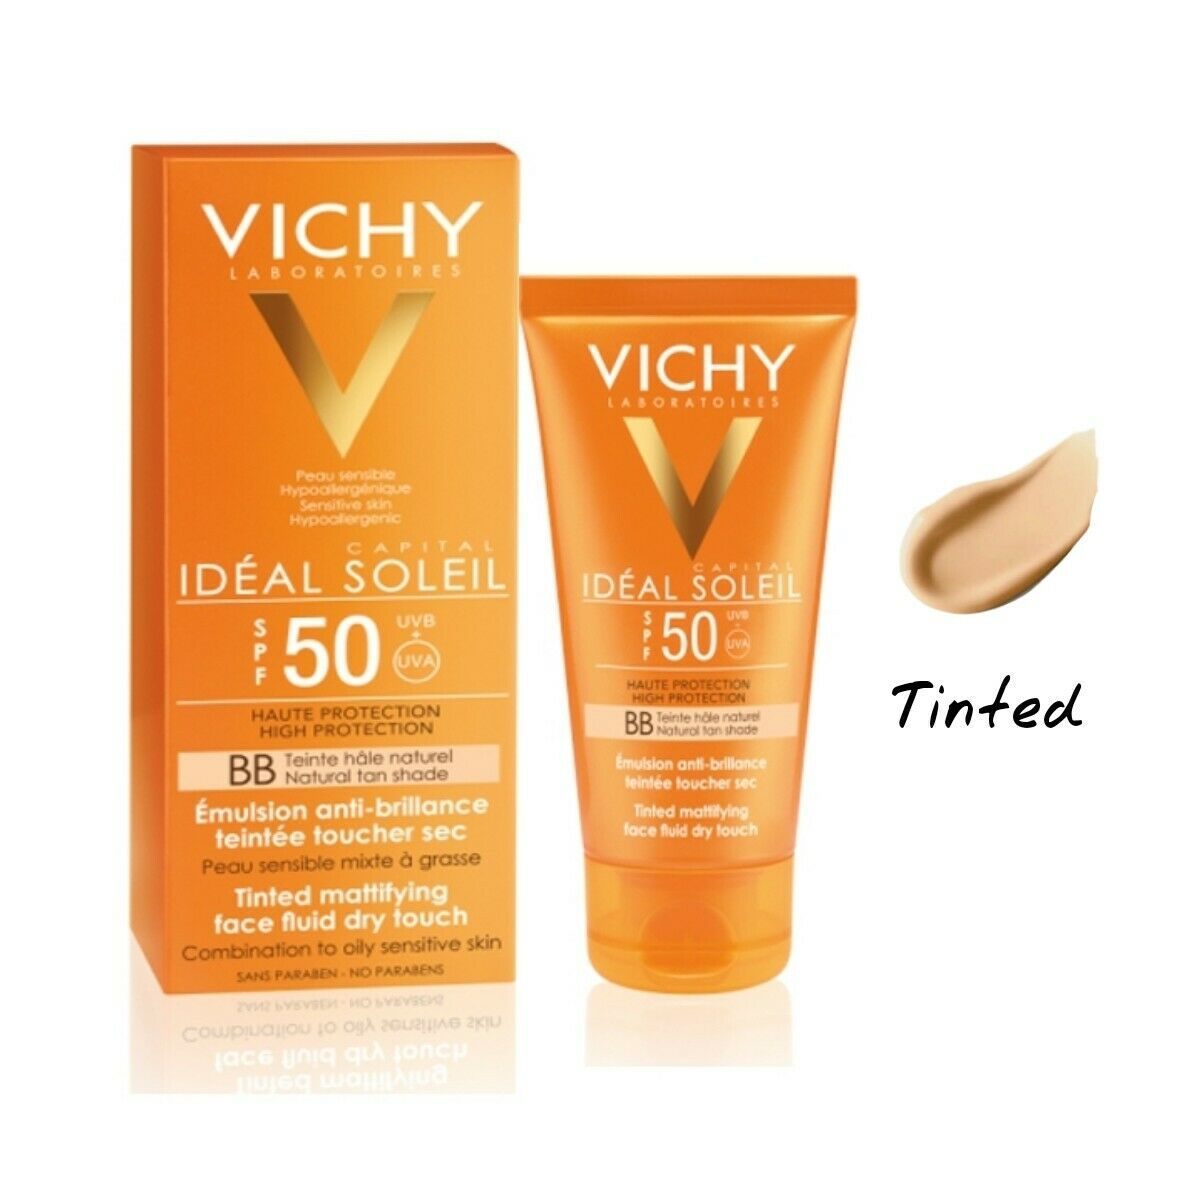 Vichy Ideal Soleil BB Tinted Mattifying Dry Touch Face Fluid SPF50 50ml